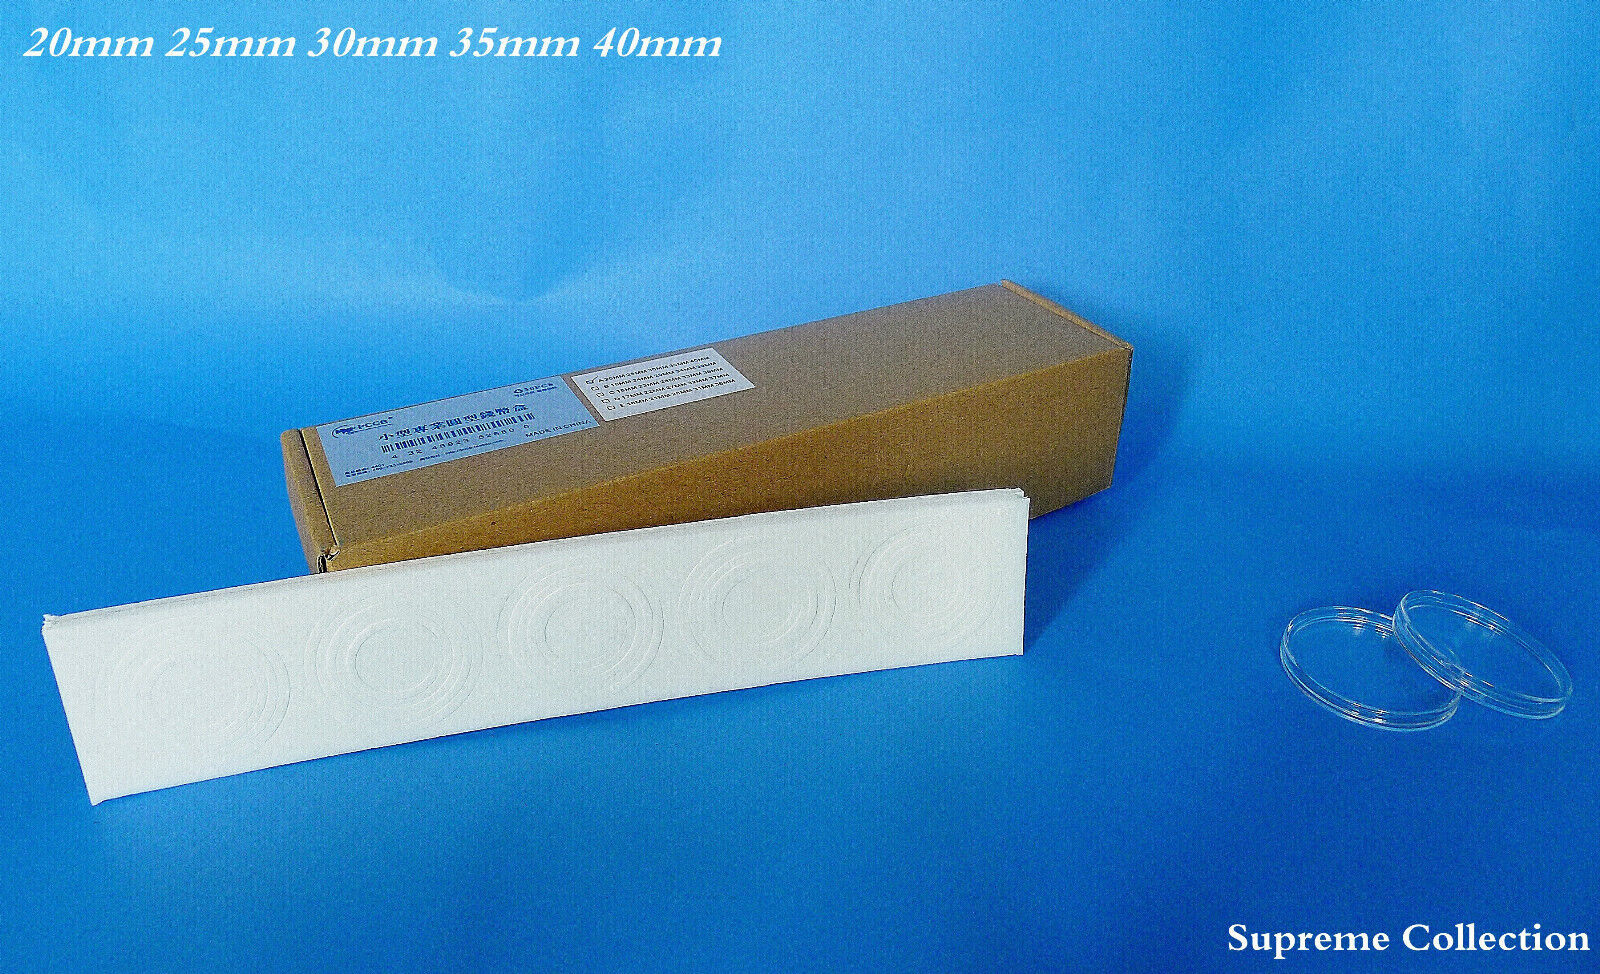 Primary image for 30 Pcs Box Round Shape Air Tite Coin holder 20 25 30 35 40mm High Quality White